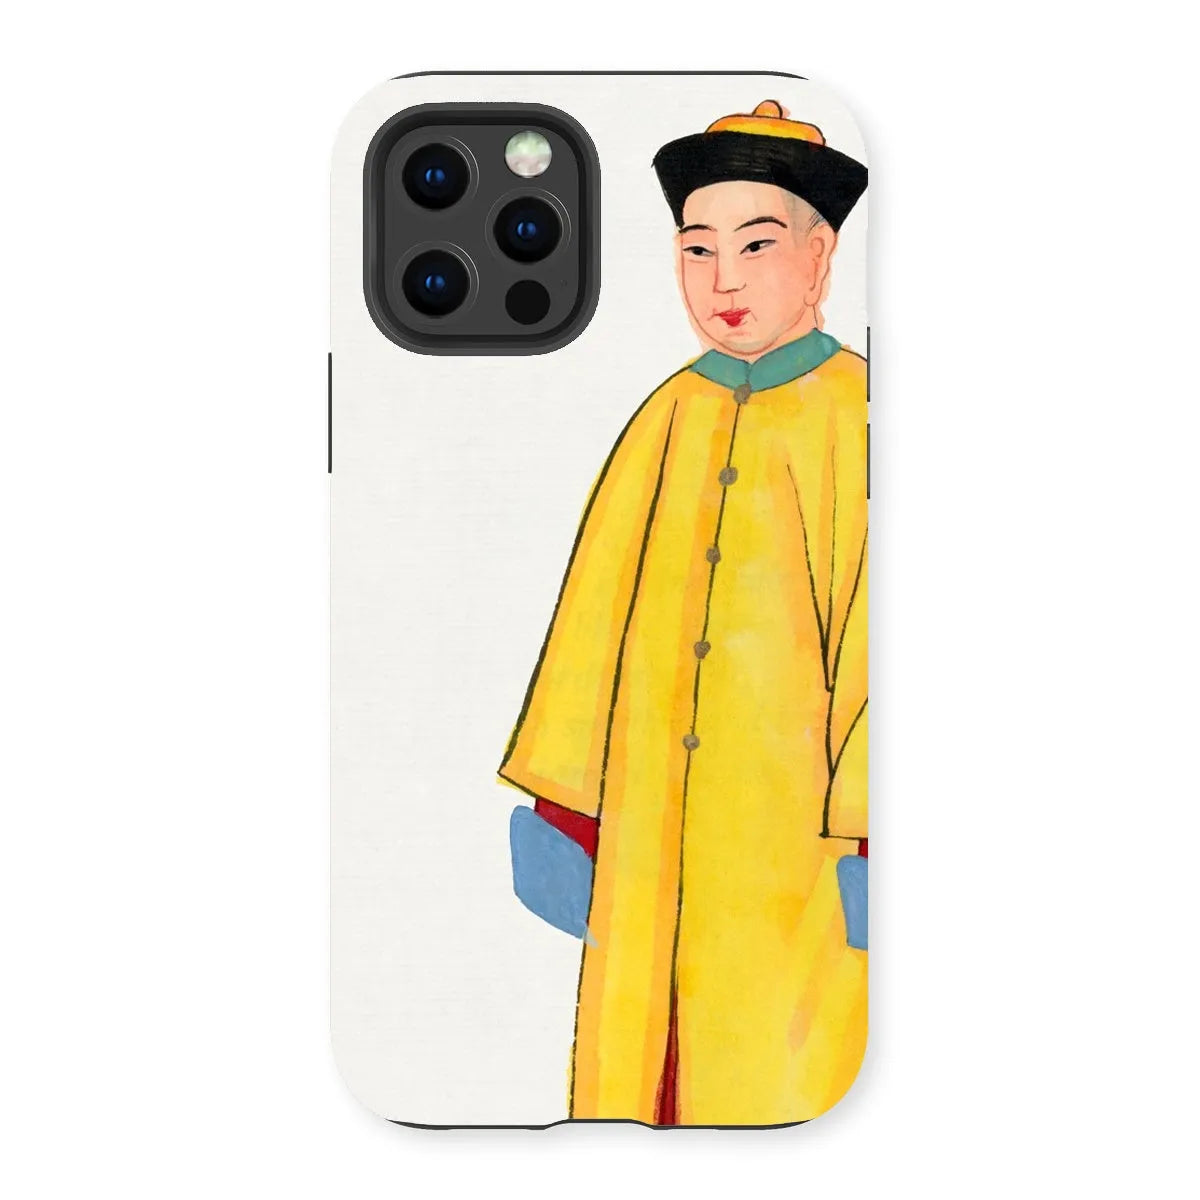 Priest In Yellow Robes - Chinese Aesthetic Art Phone Case - Iphone 13 Pro / Matte - Mobile Phone Cases - Aesthetic Art